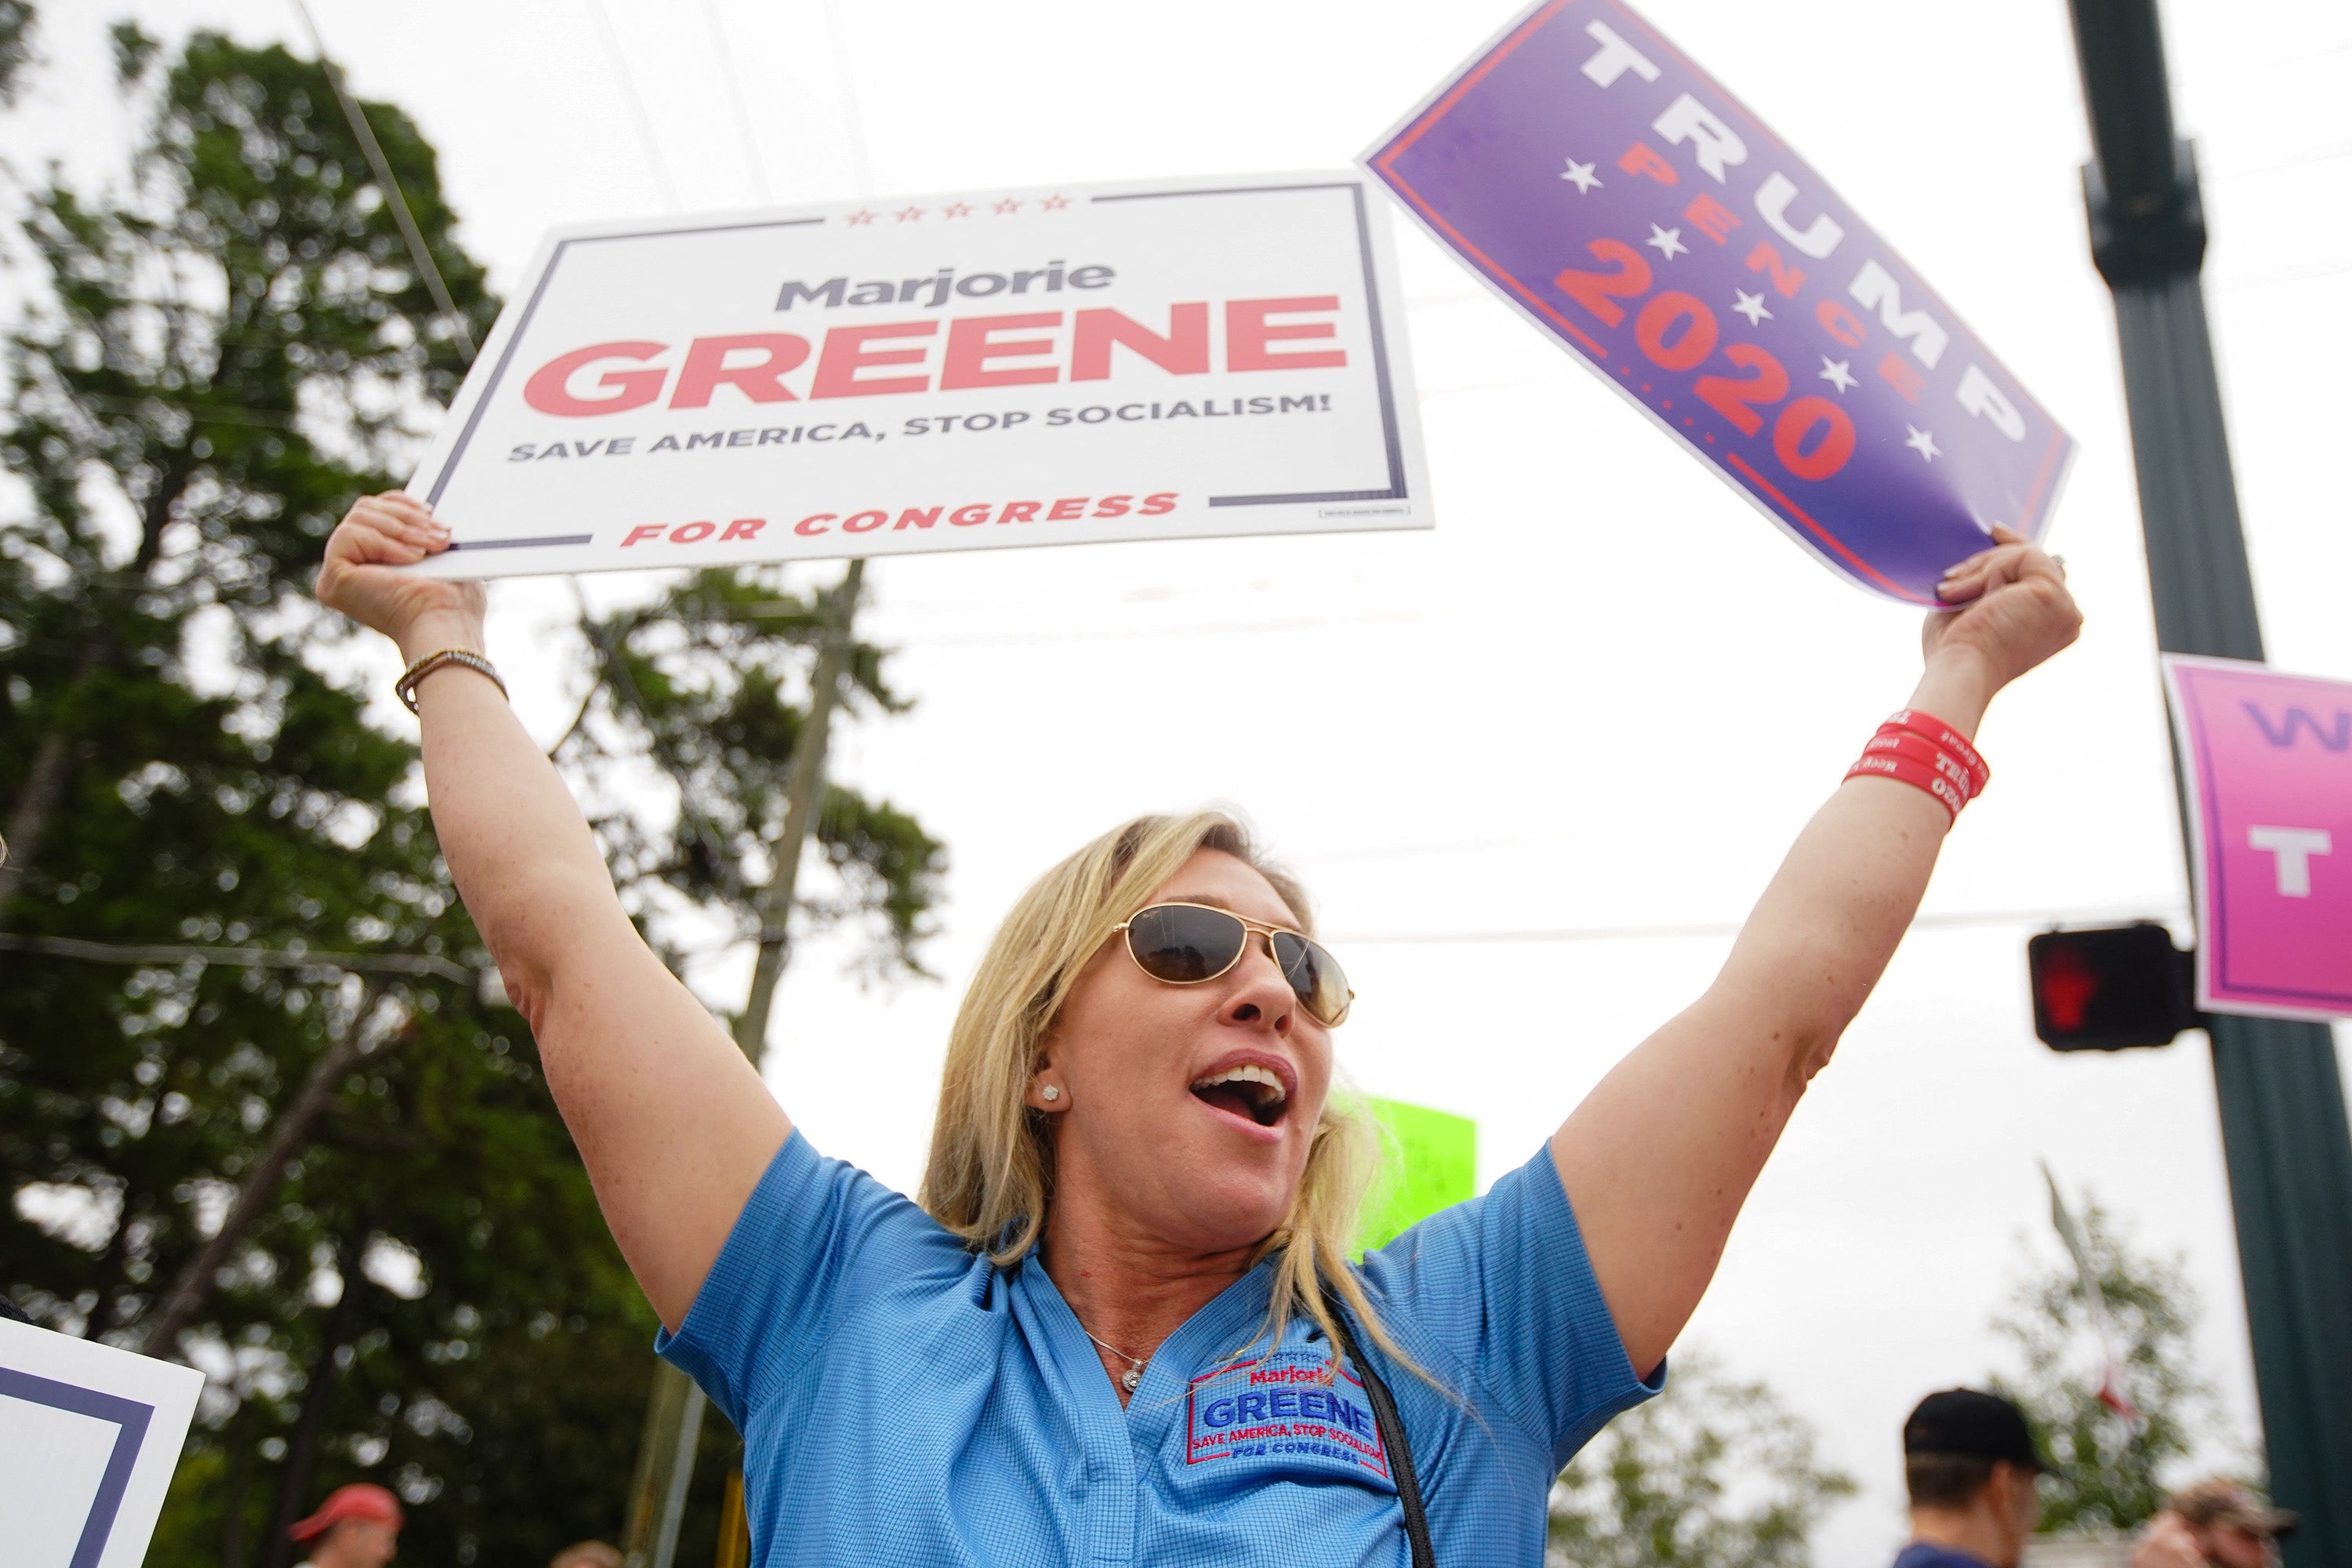 Greene holds up campaign signs in support of her and Donald Trump.